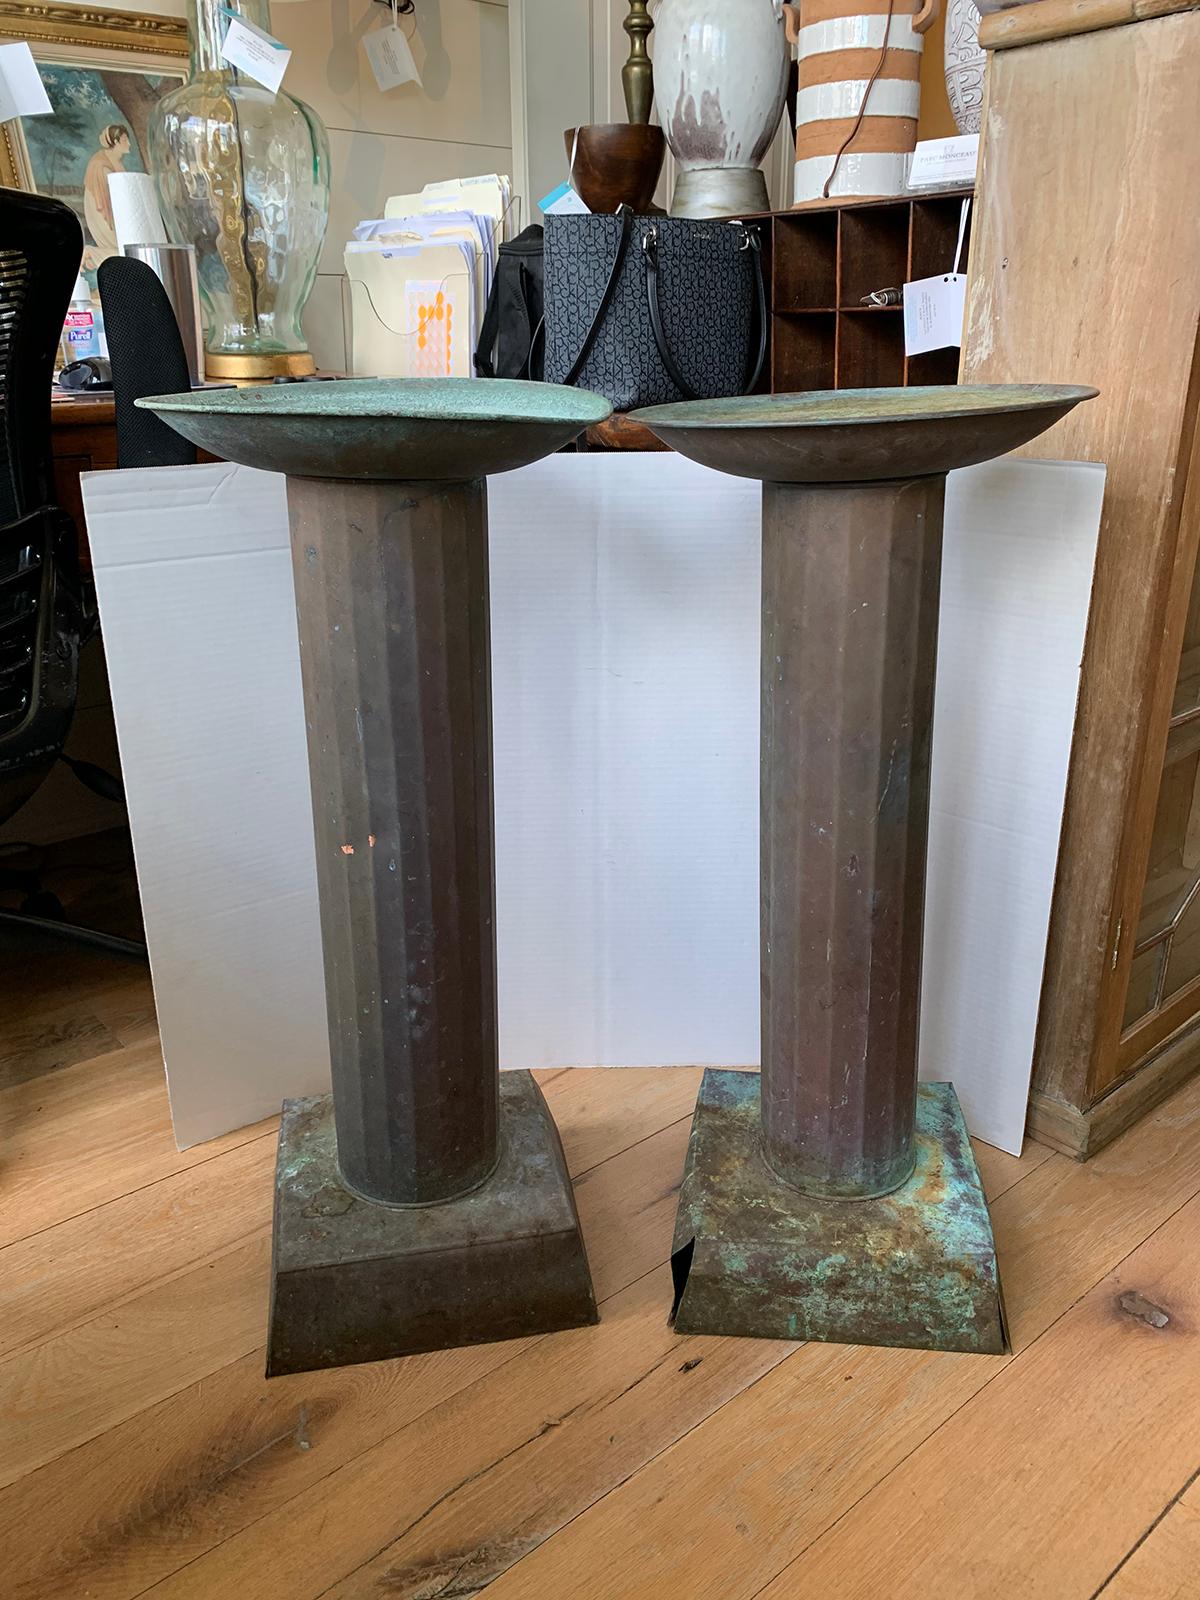 Pair of early 20th century copper bird baths
Measures: 13.5